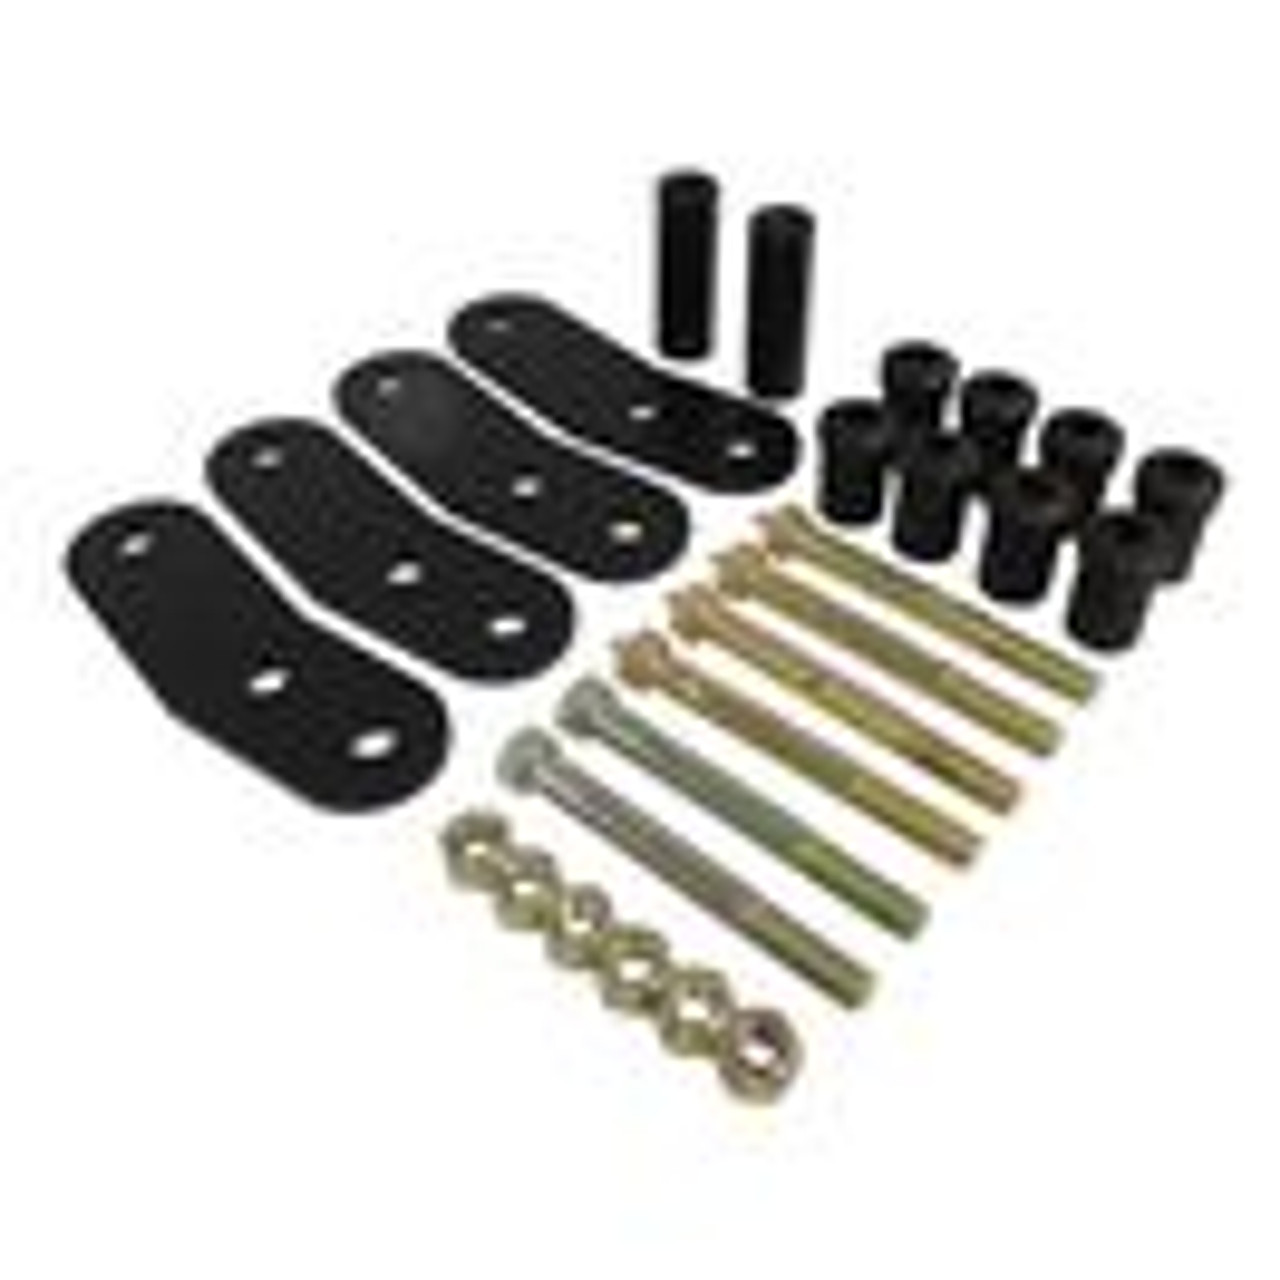 Rear boomerang shackle kit, for 2-1/2" wide springs